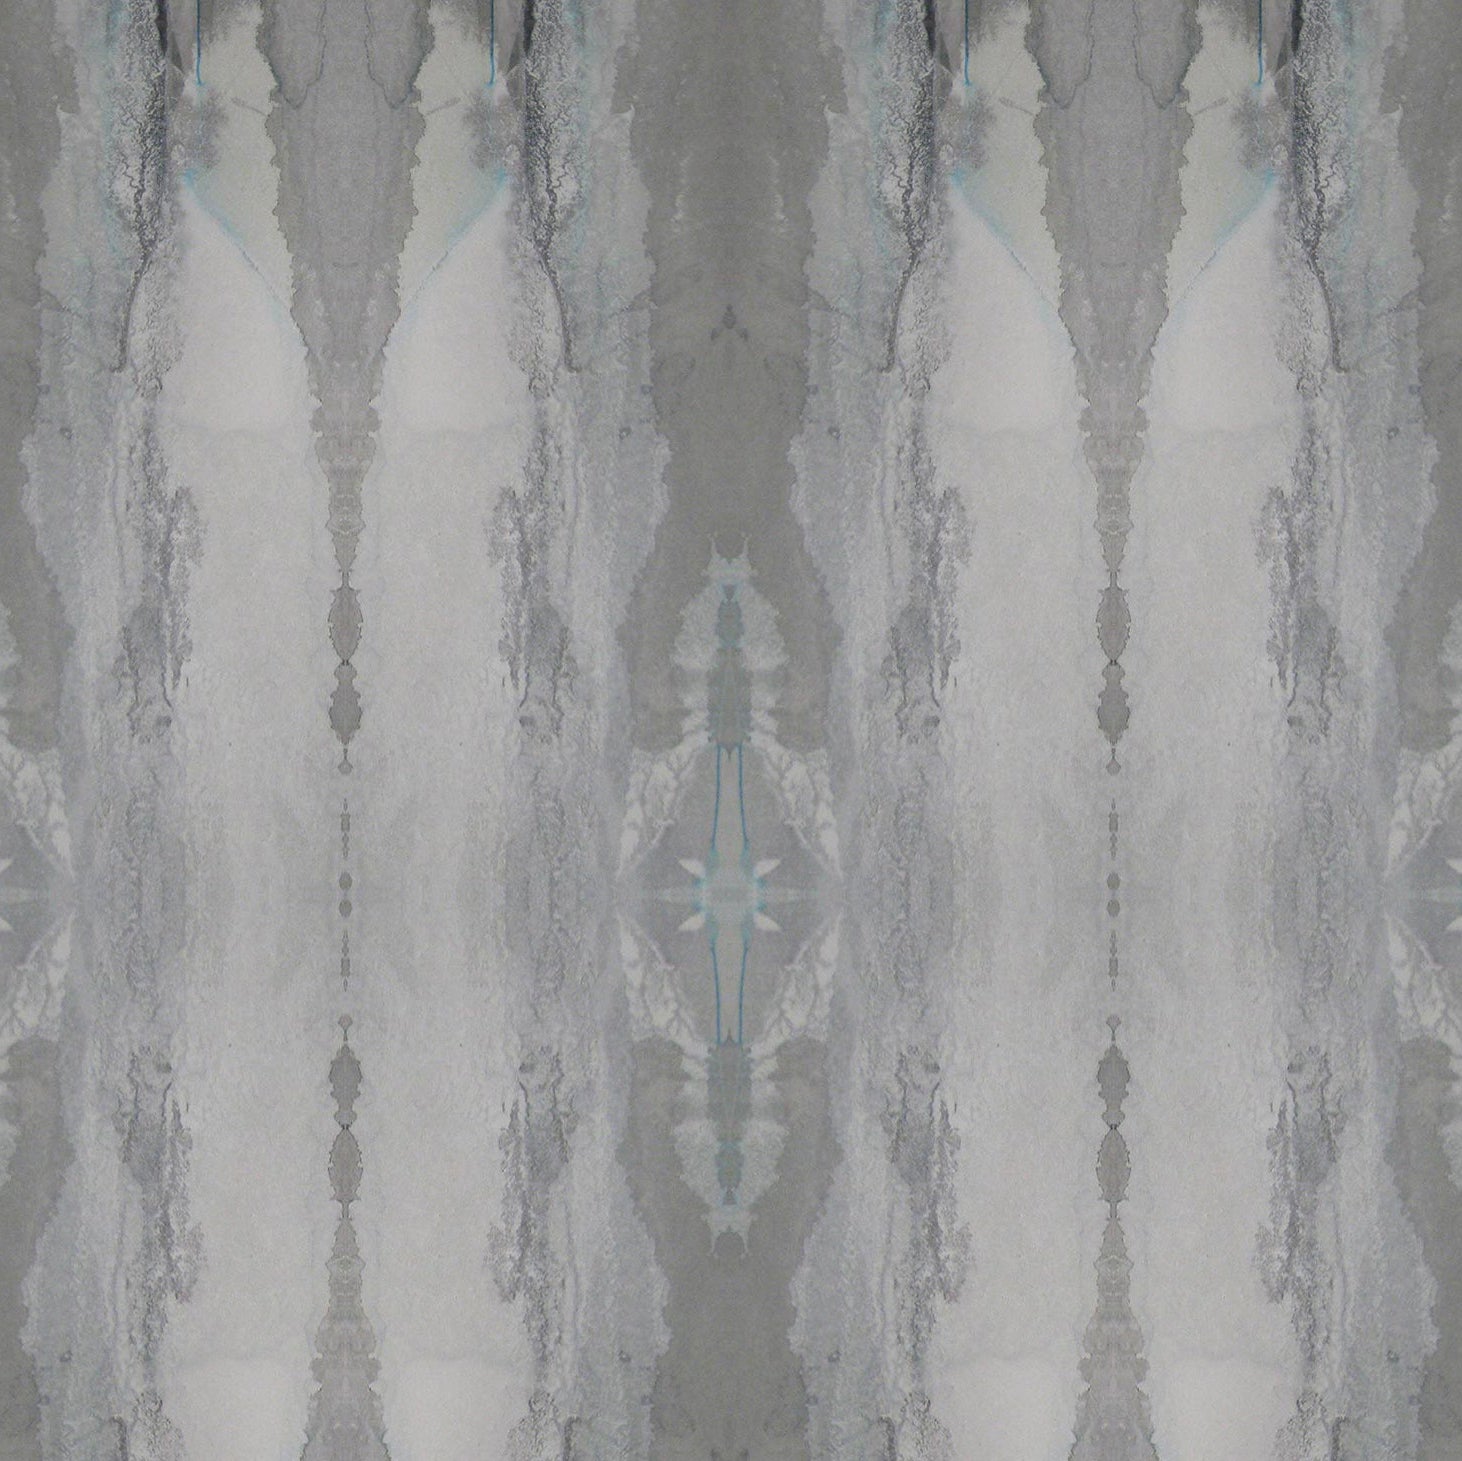 Detail of wallpaper in an abstract textural print in shades of gray.